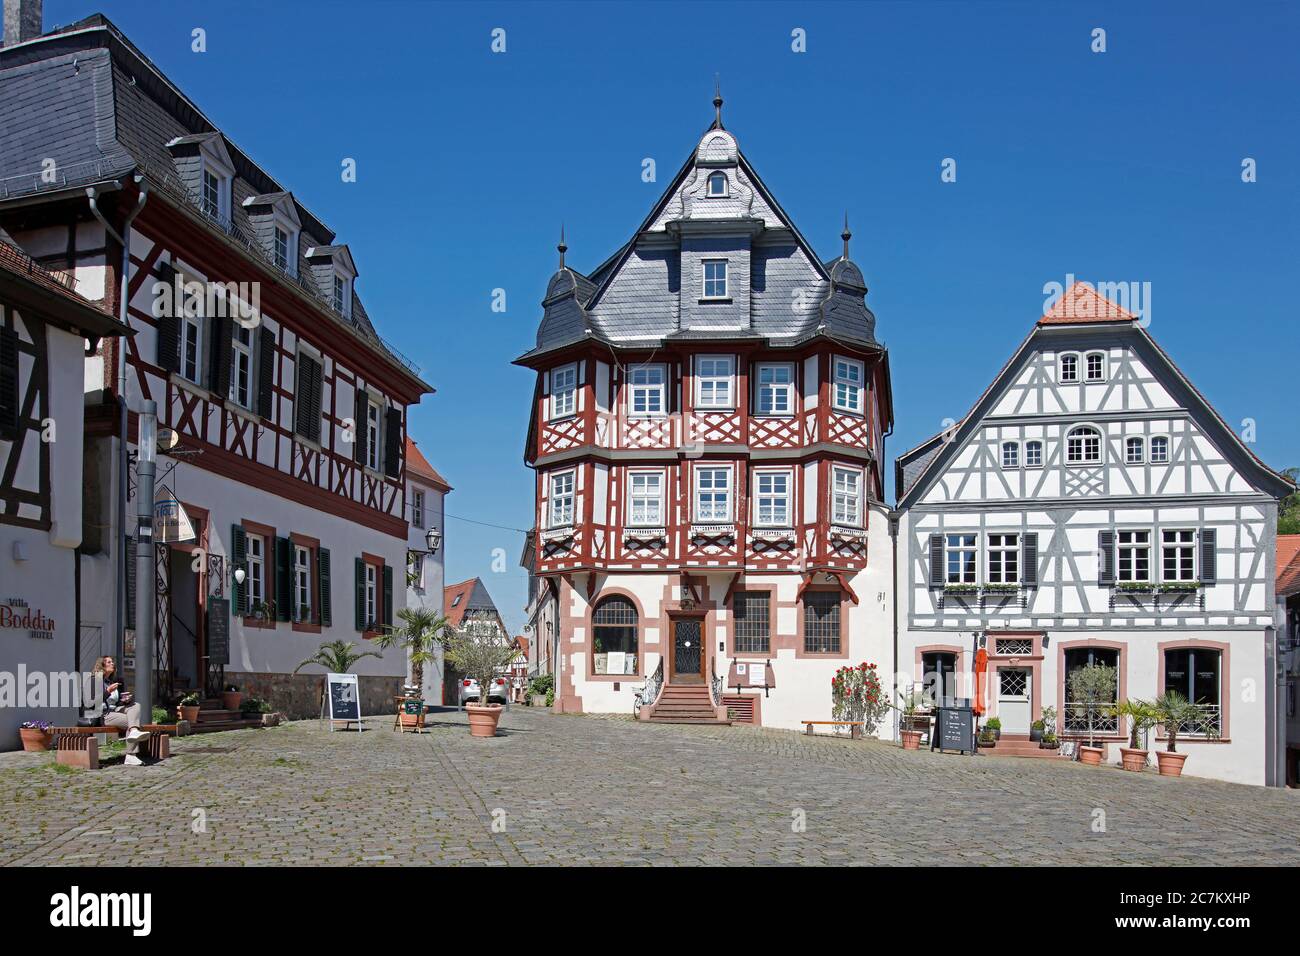 Former pharmacy Pirsch, 1817/18 apprenticeship of the later world-famous chemist Justus von Liebig (1803-1873), market place, half-timbered houses, Heppenheim, Bergstrasse, Odenwald, Hesse, Germany Stock Photo